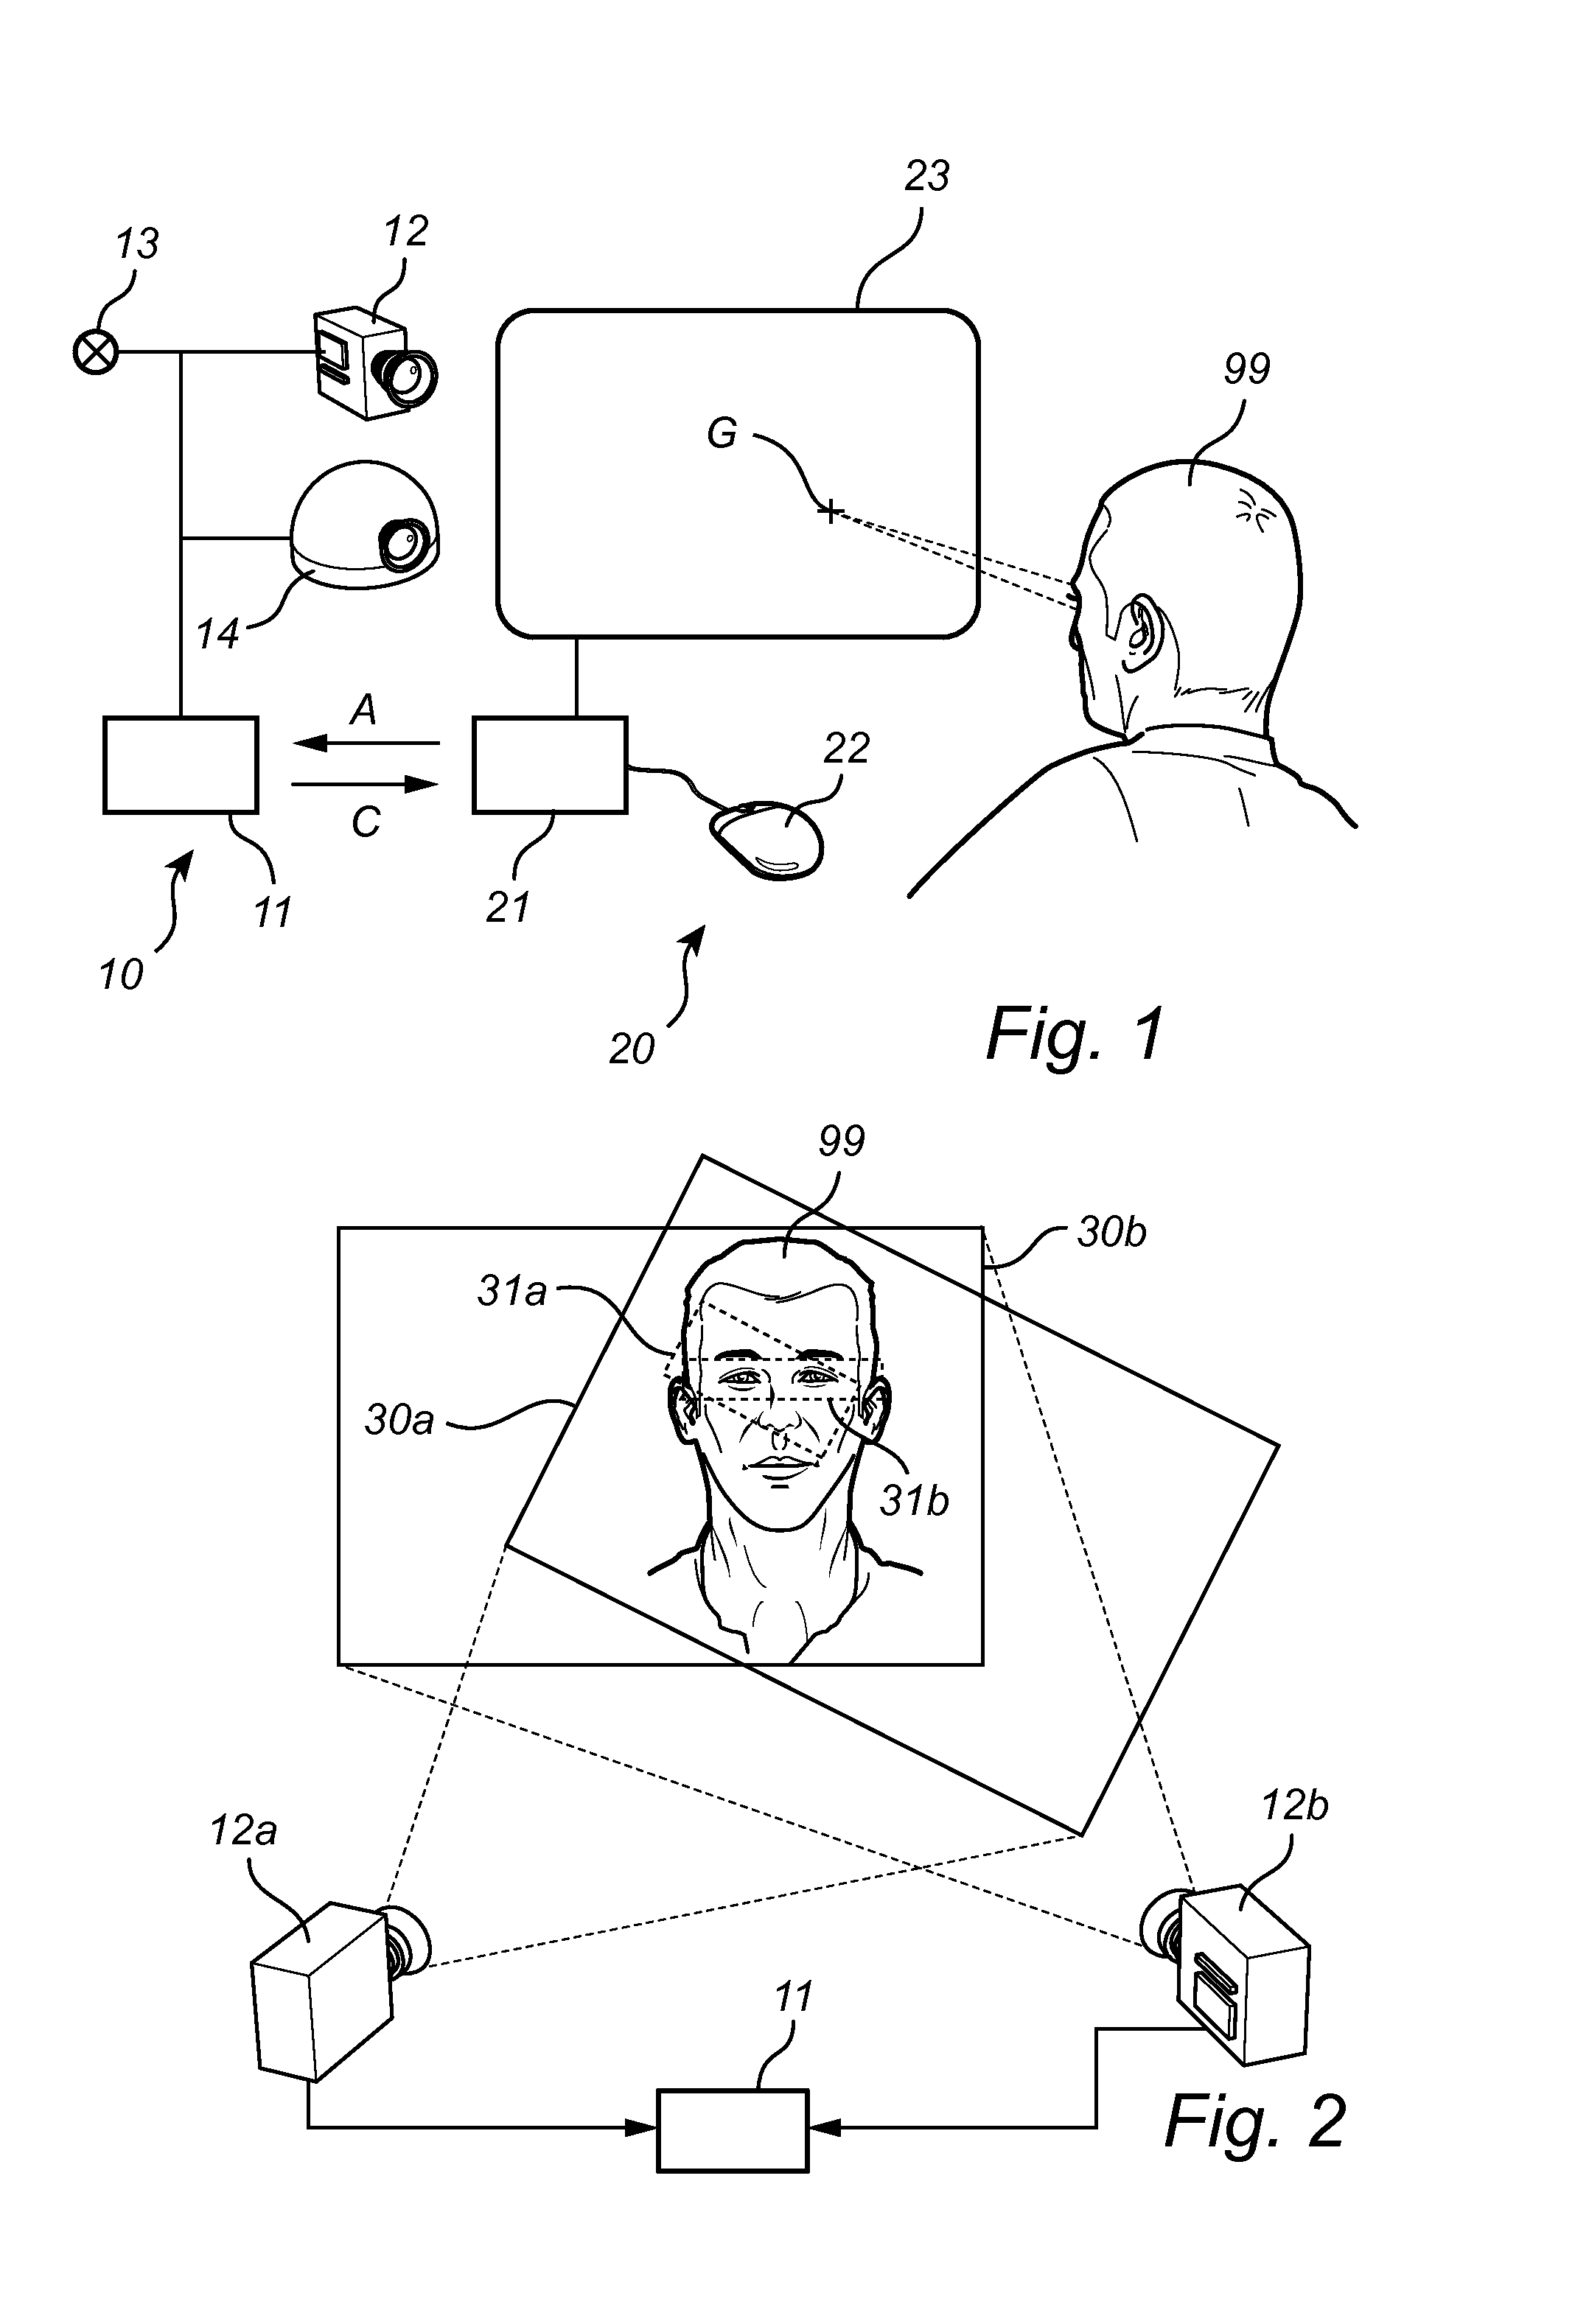 Fast wake-up in a gaze tracking system